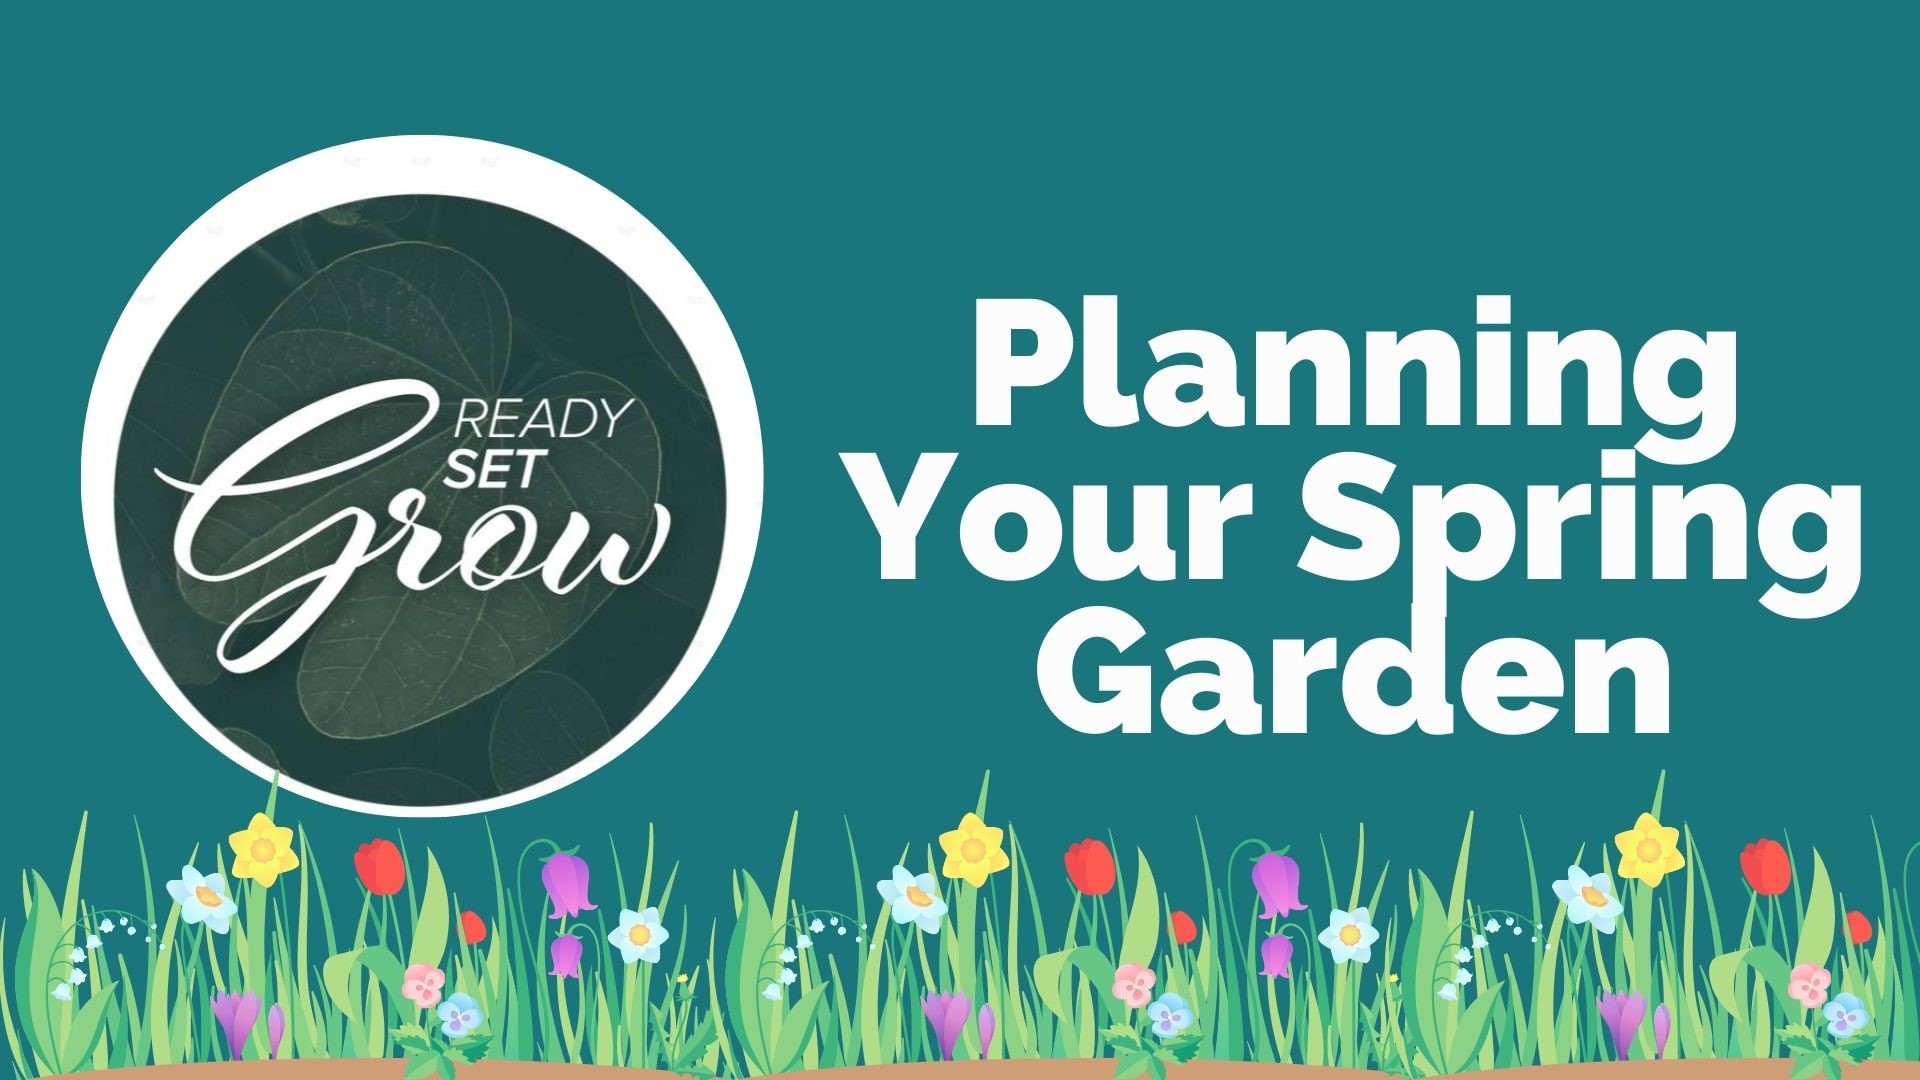 Now is the time to start planning your spring garden. A look at everything you need to know about starting seeds and getting your lawn in order.